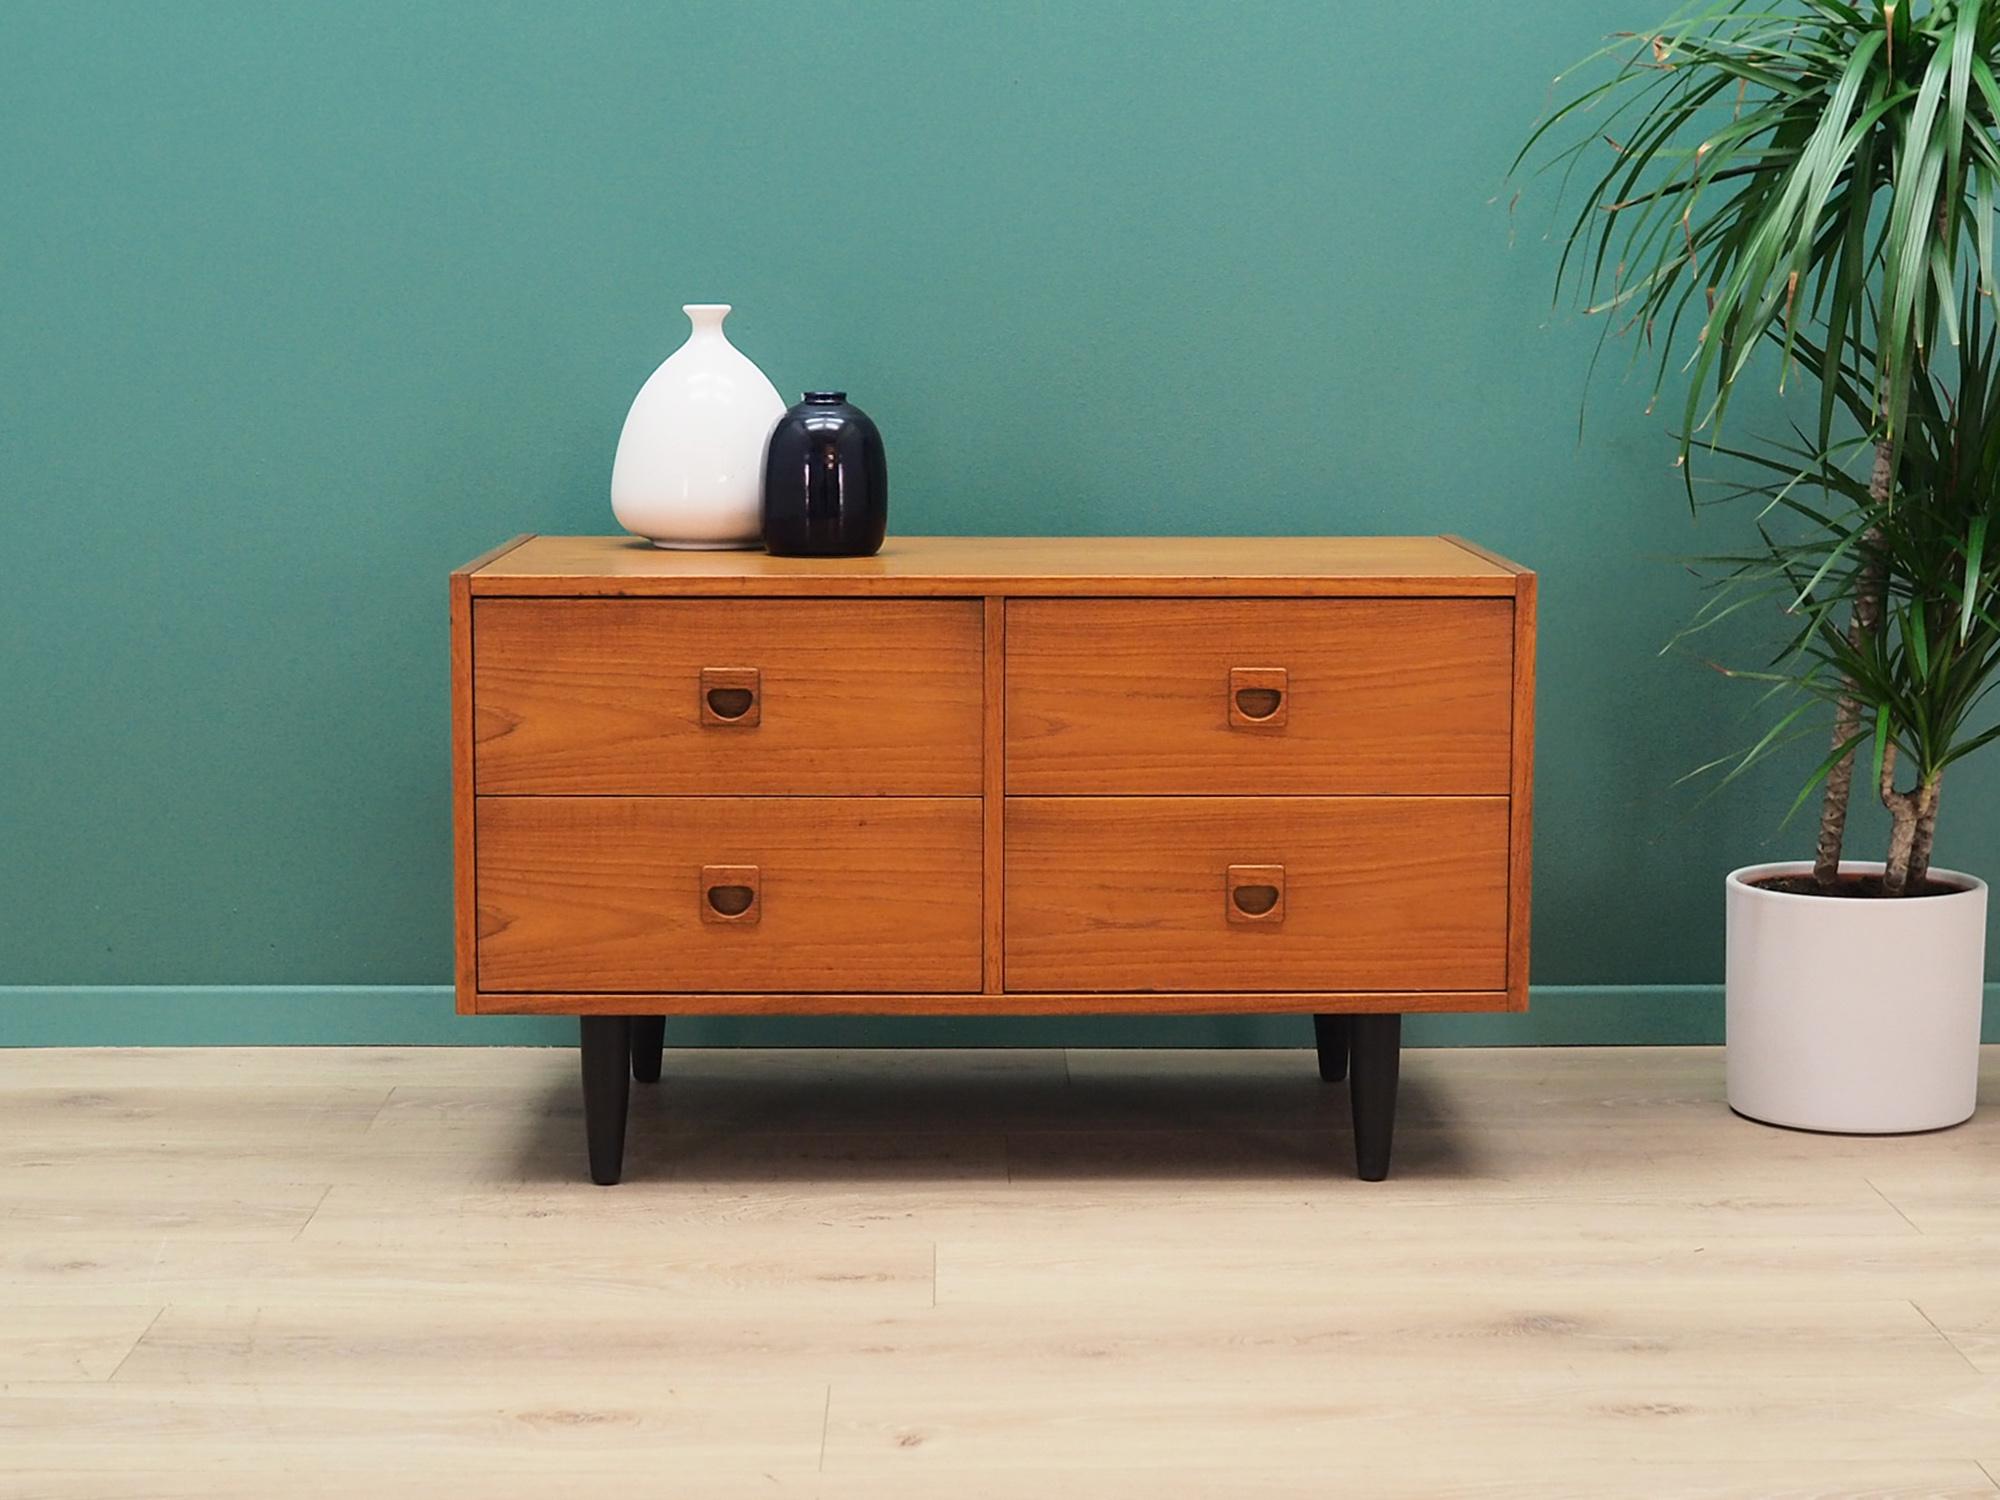 Brilliant chest of drawers from the 1960s-1970s. Minimalist form, Danish design. The furniture is covered with teak veneer, legs are made of solid teak wood. The chest has four symmetrical drawers. Preserved in good condition (small bruises and